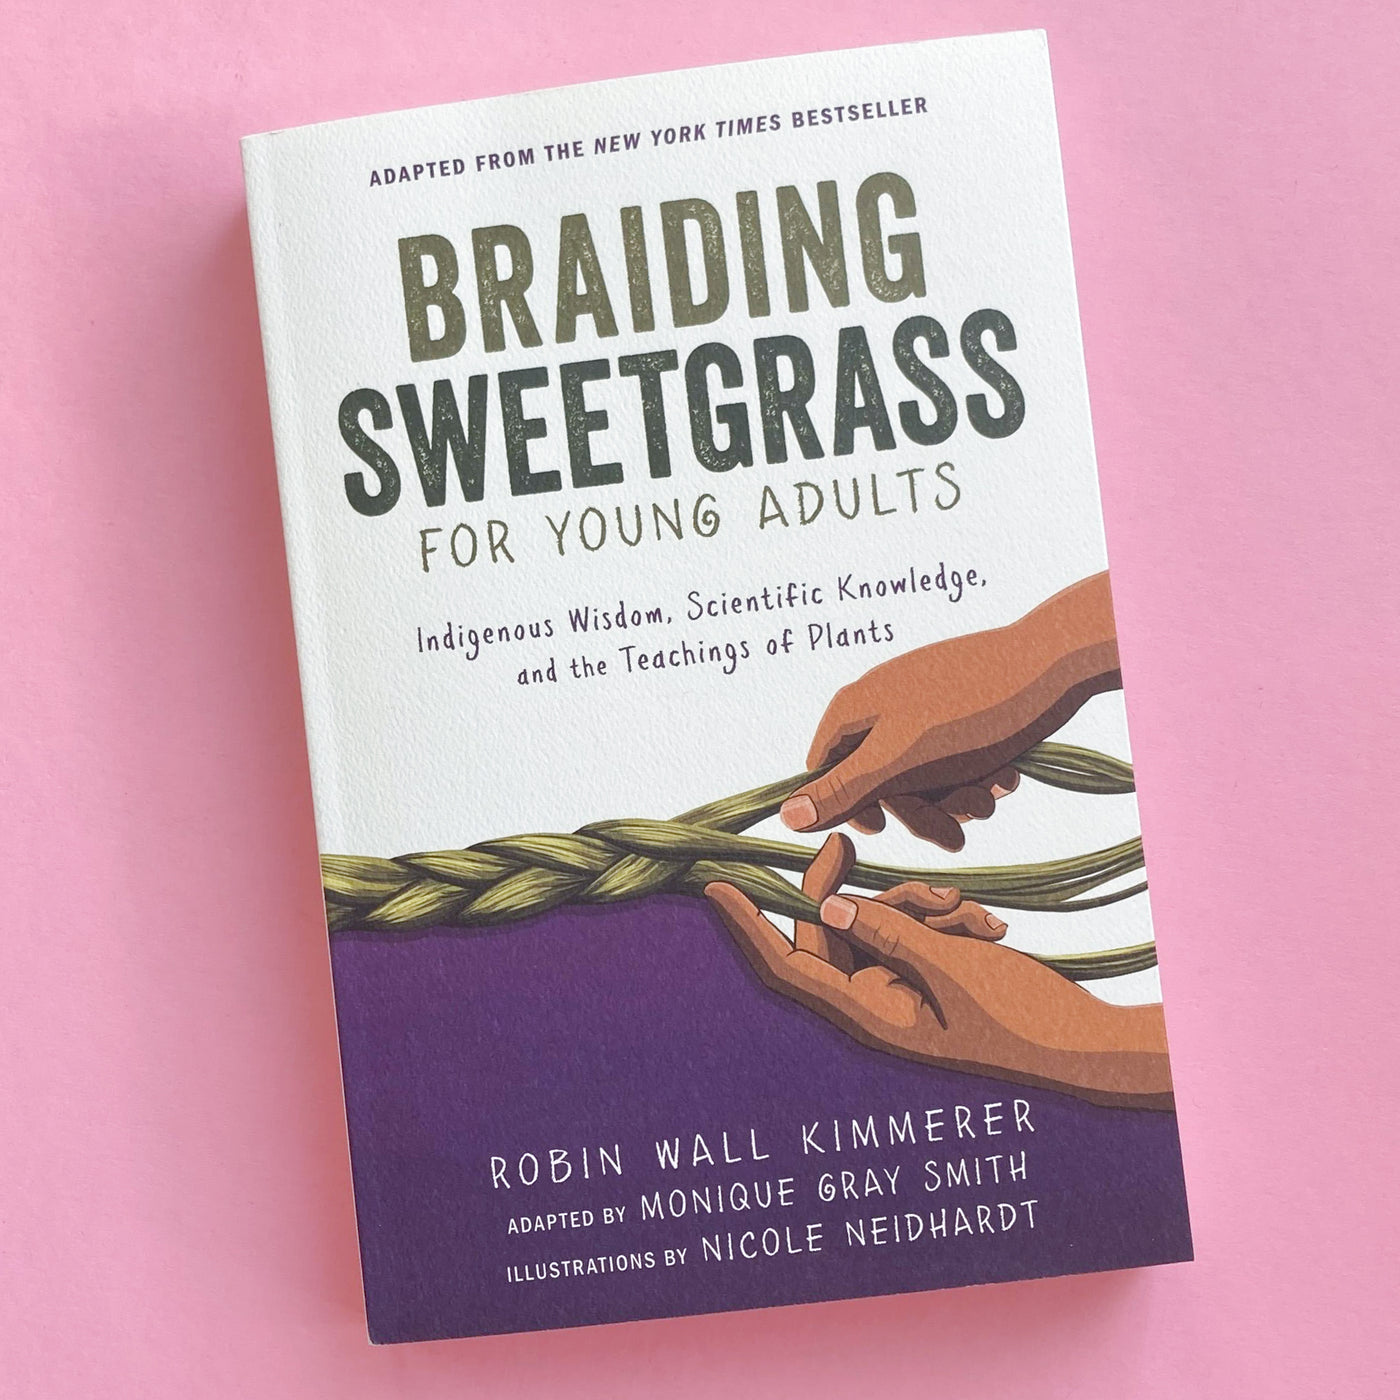 Braiding Sweetgrass for Young Adults: Indigenous Wisdom, Scientific Knowledge, and the Teachings of Plants by Robin Wall Kimmerer, Monique Gray Smith, et al.